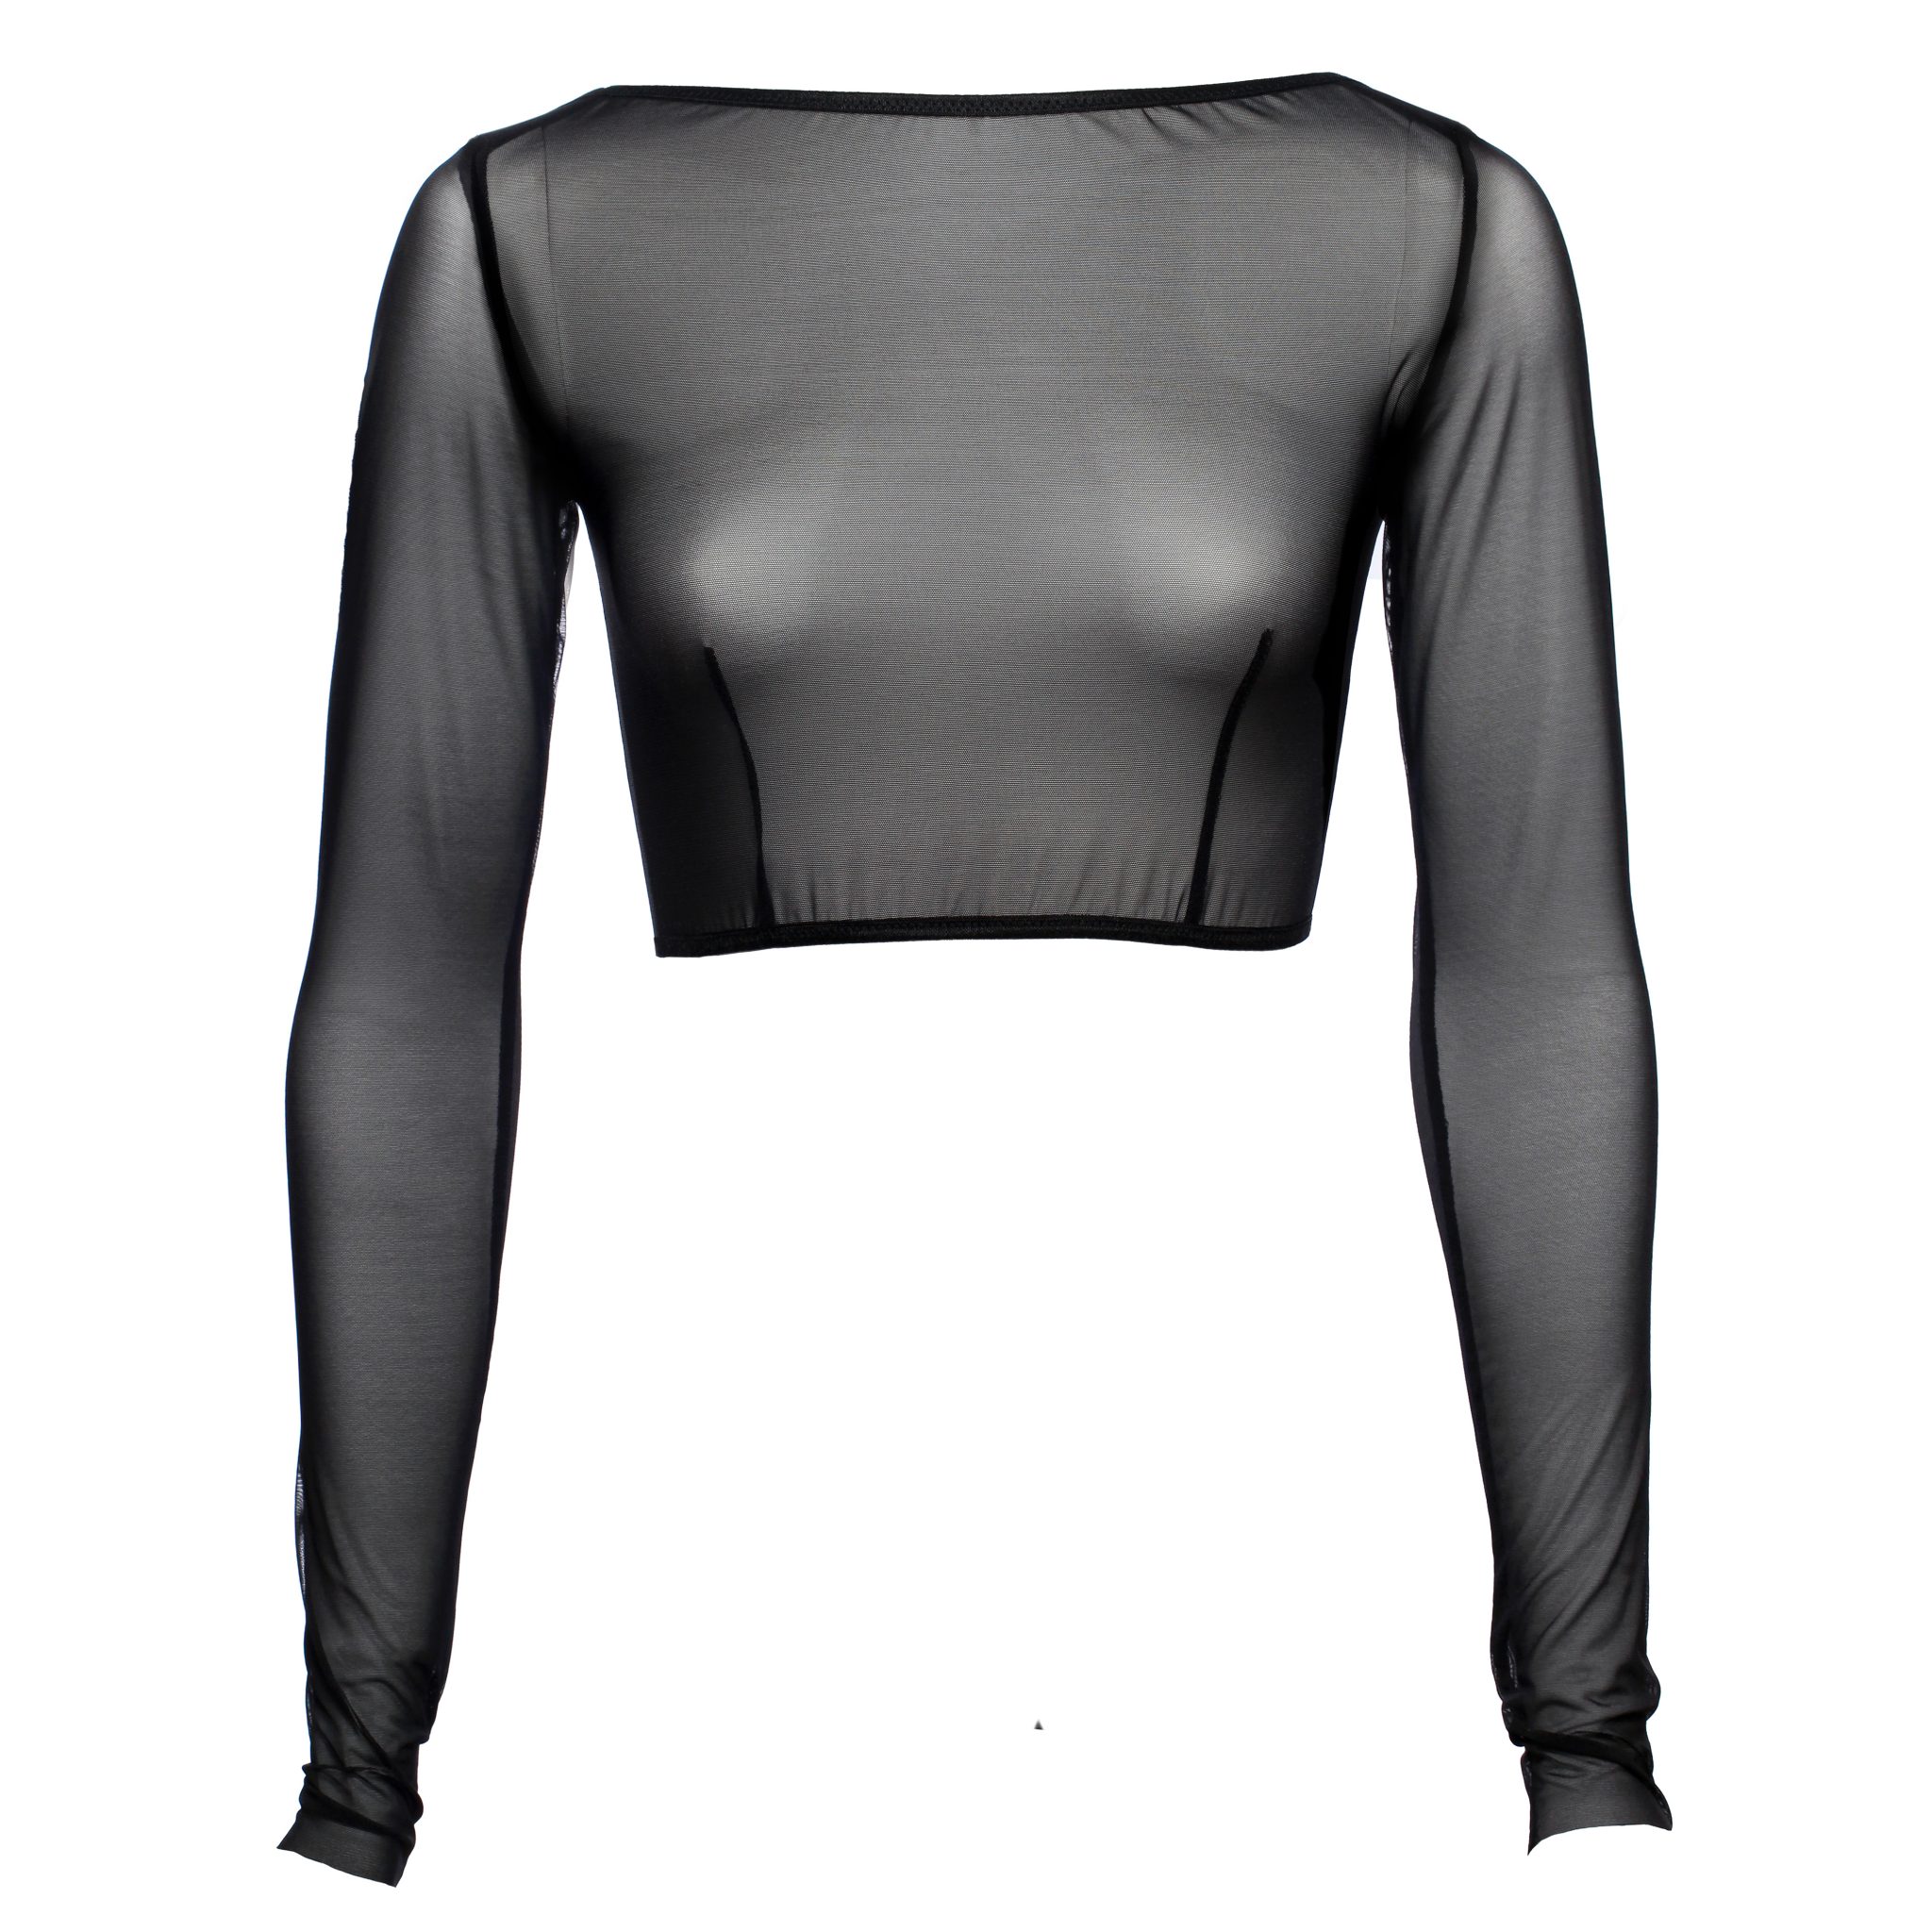 Black Mesh Crop Top with Long Sleeves by Flash you and me